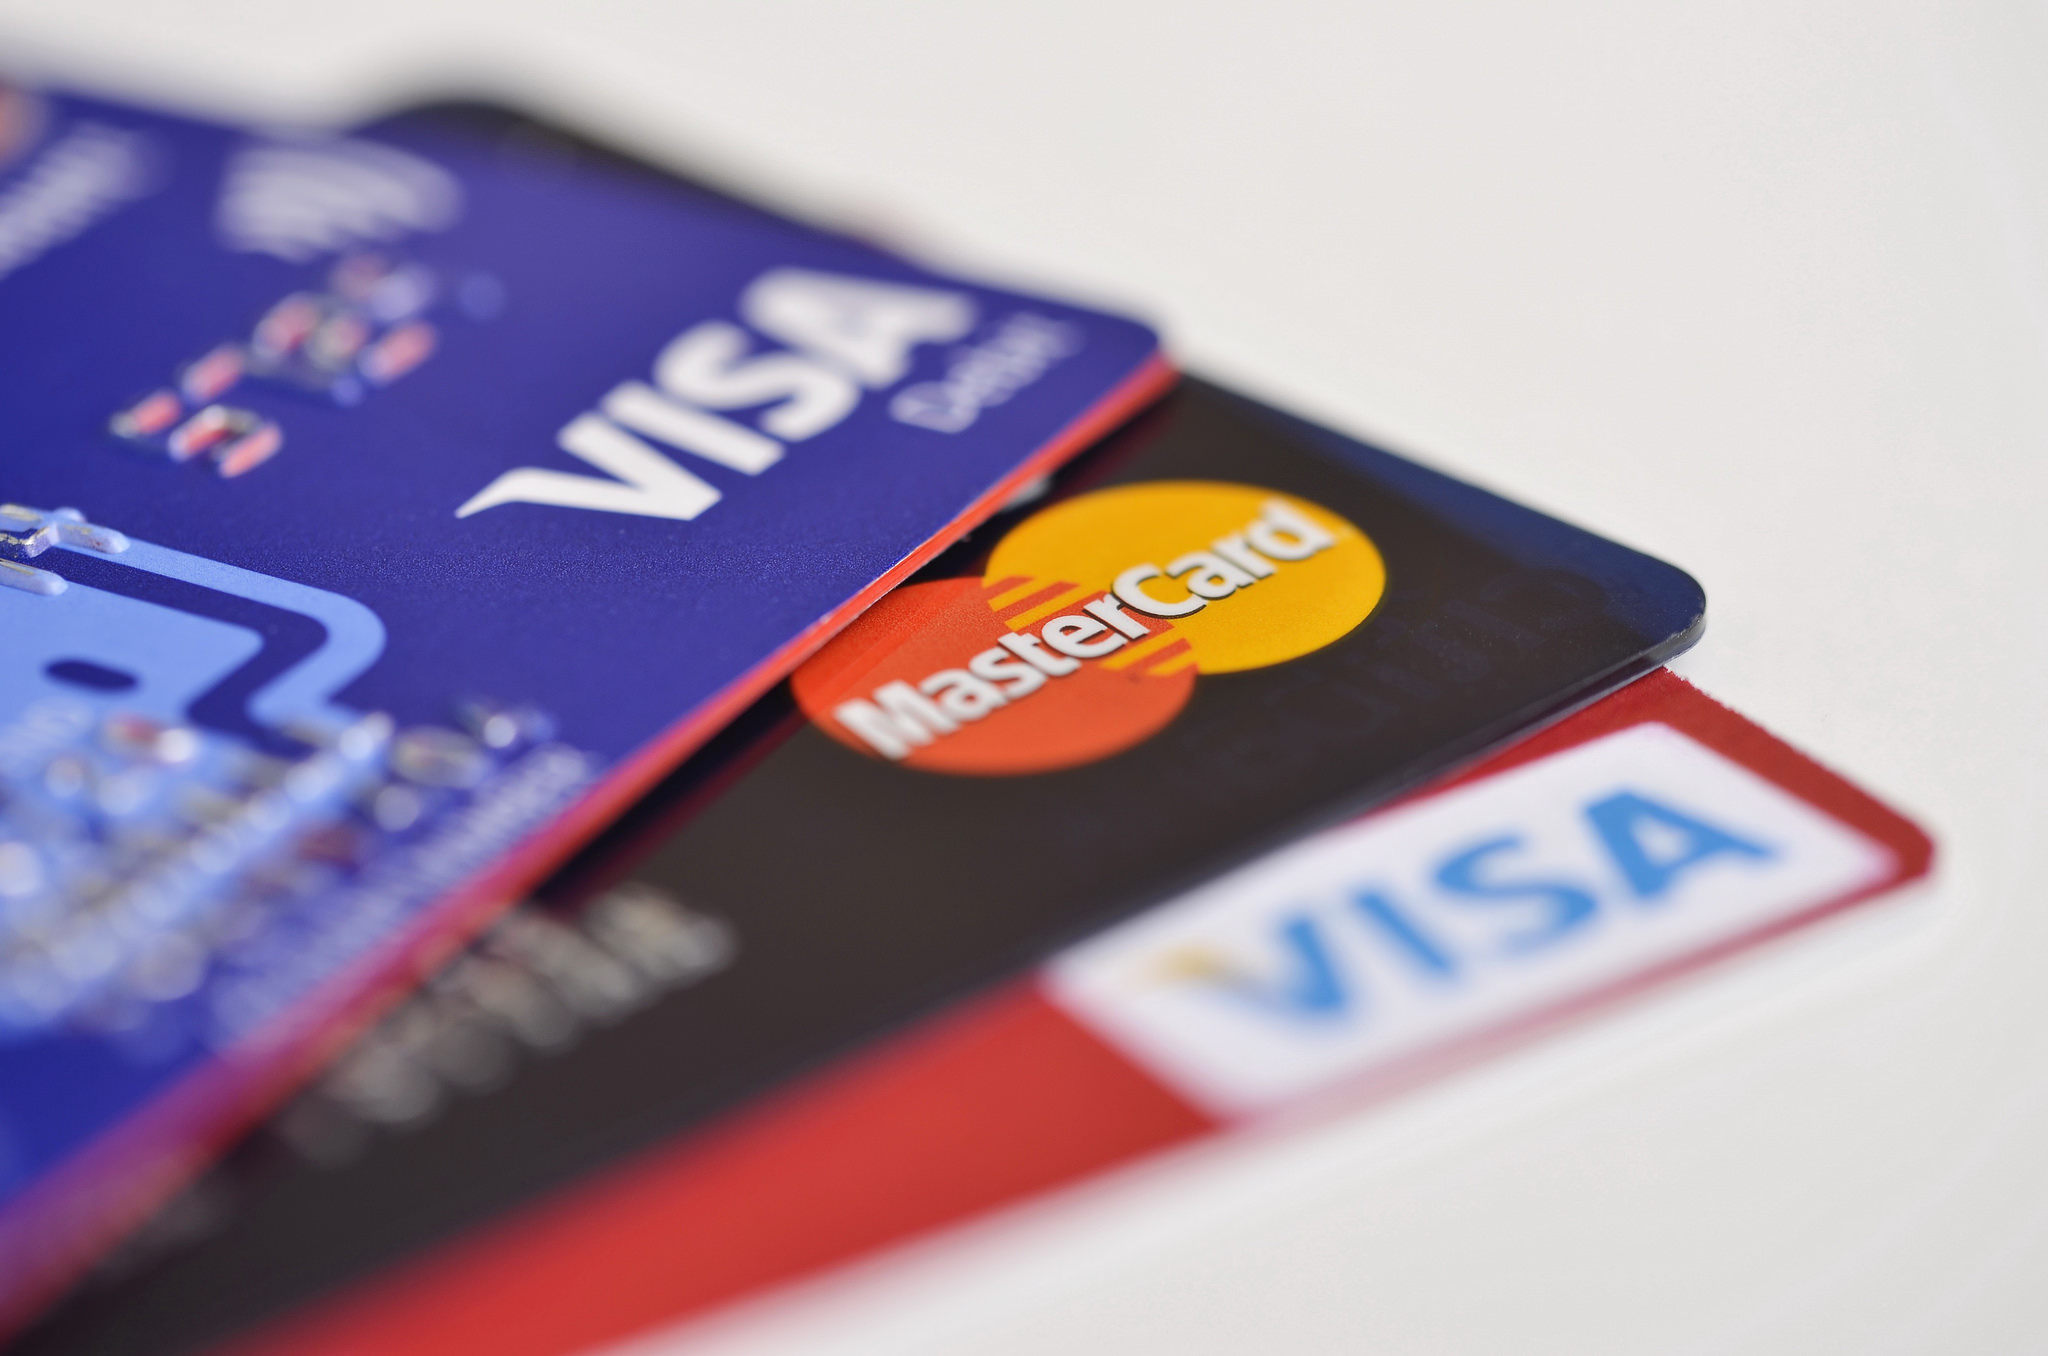 Limits of credit cards international travel insurance